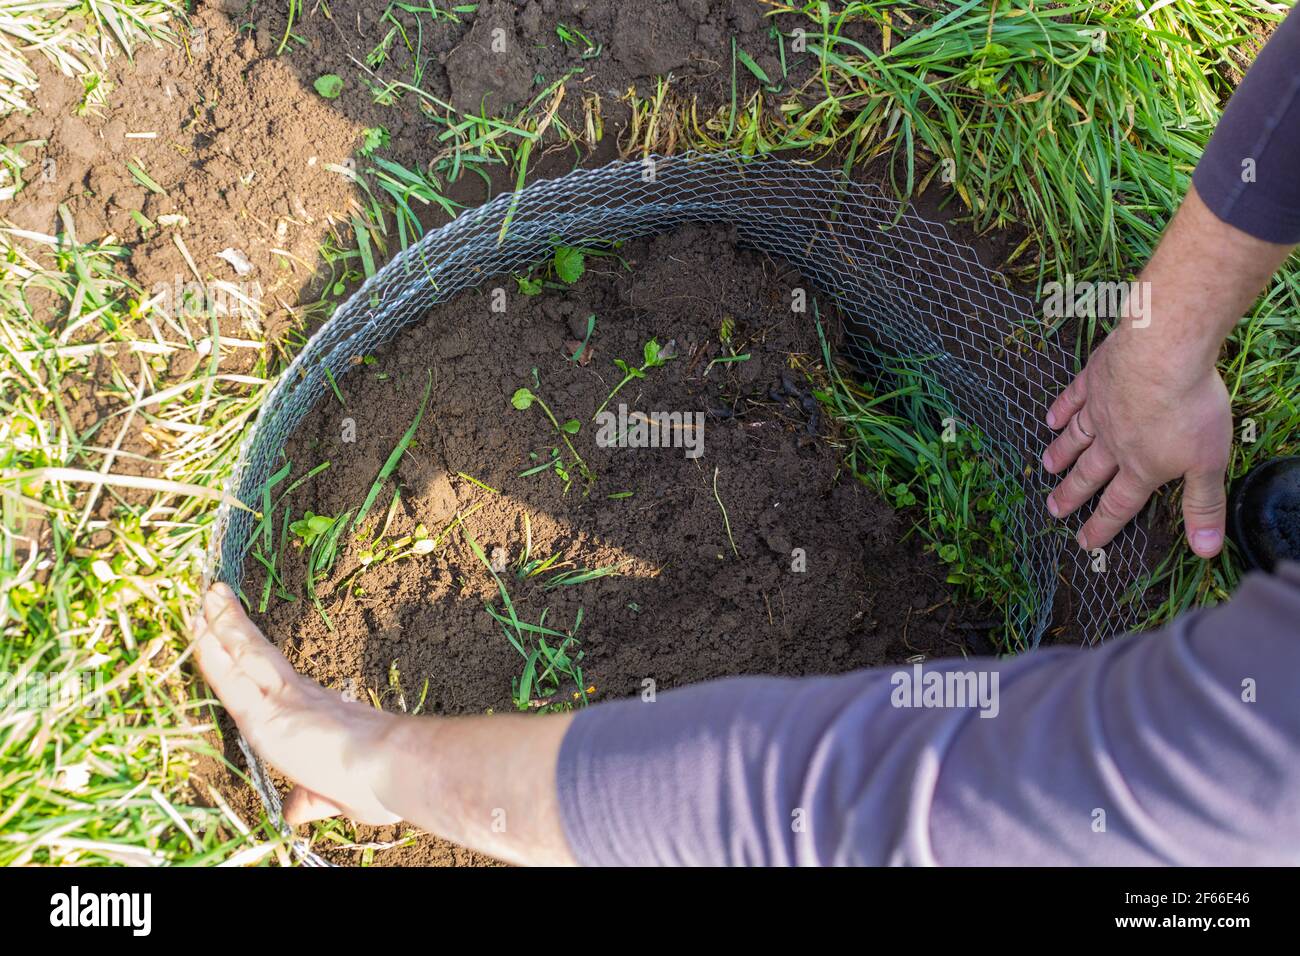 In the hole for planting a fruit tree, the man inserts a reinforced metal mesh to protect its roots from moles. Stock Photo